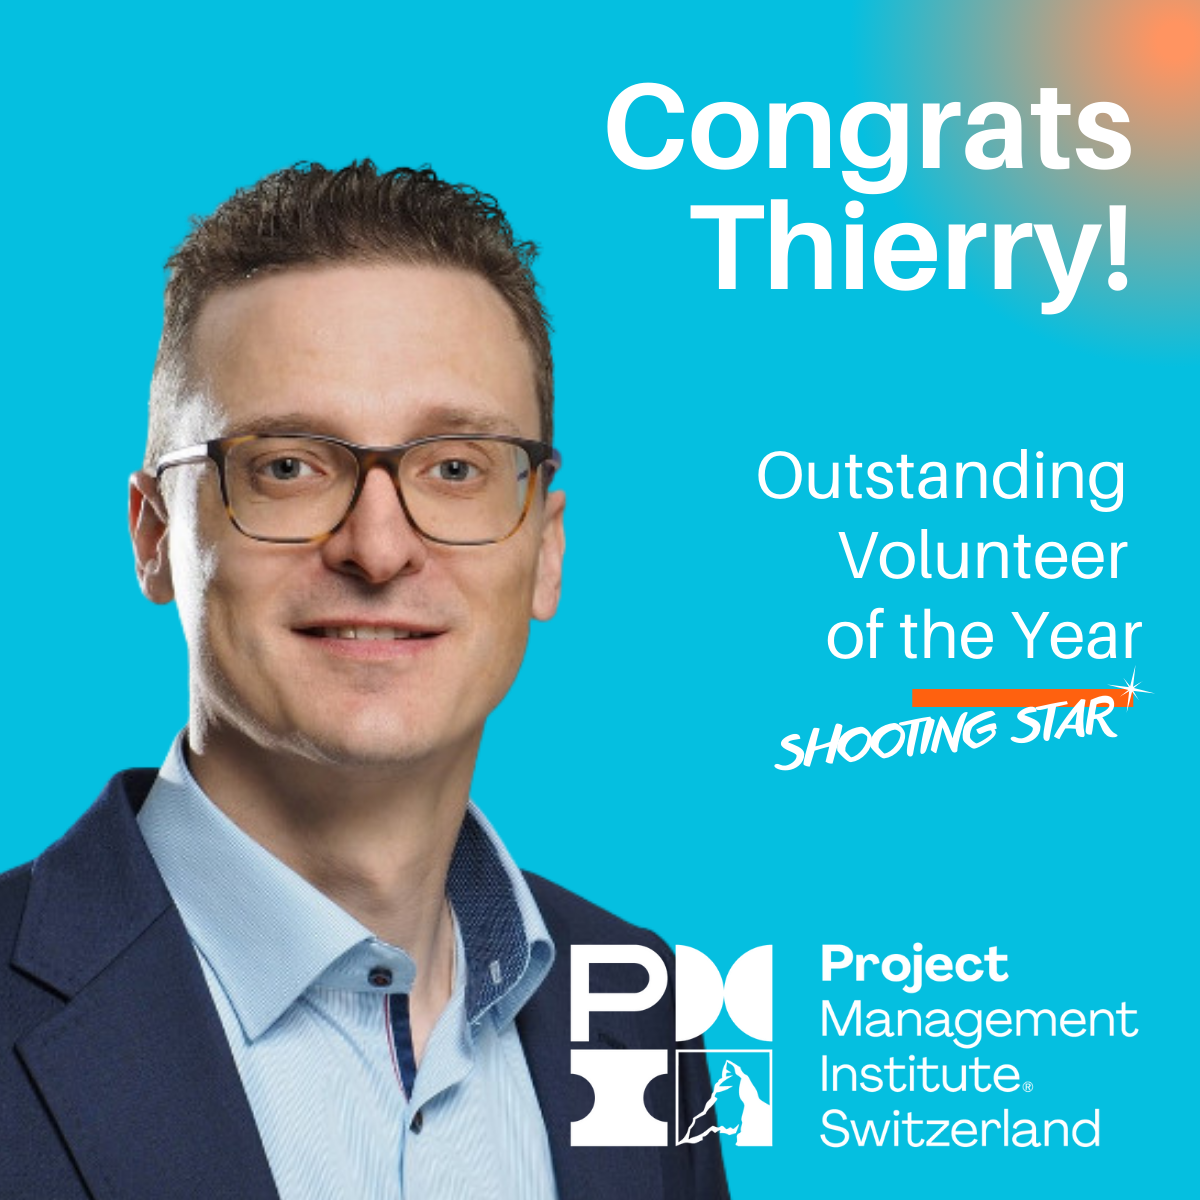 Congrats Thierry! Outstanding Volunteer of the Year s%-øoTIMé STAR Project PDQ Management Institute Switzerland 